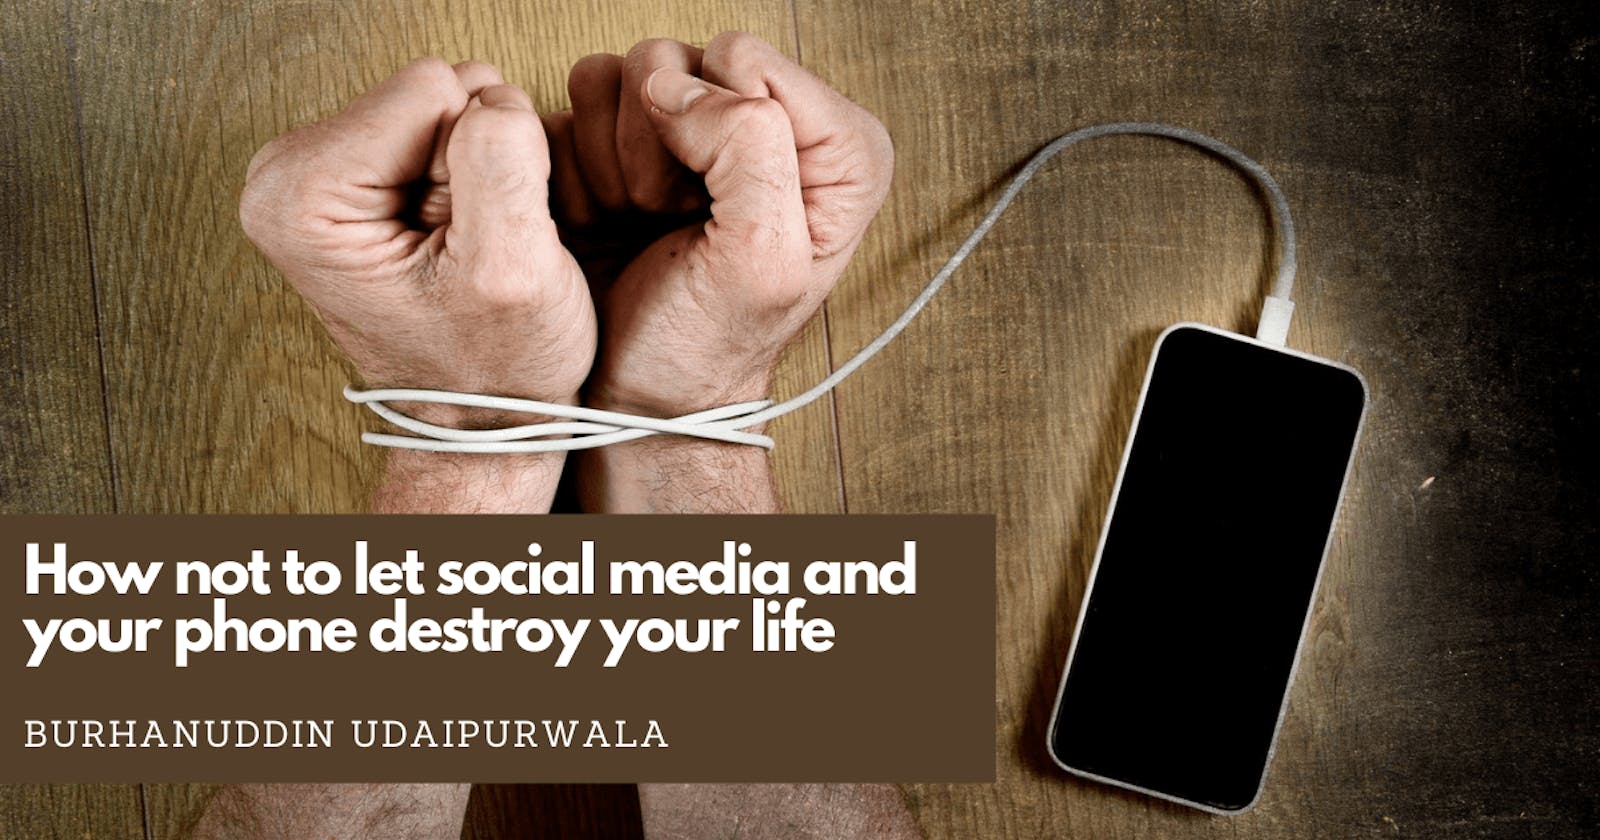 How not to let social media and your phone destroy your life